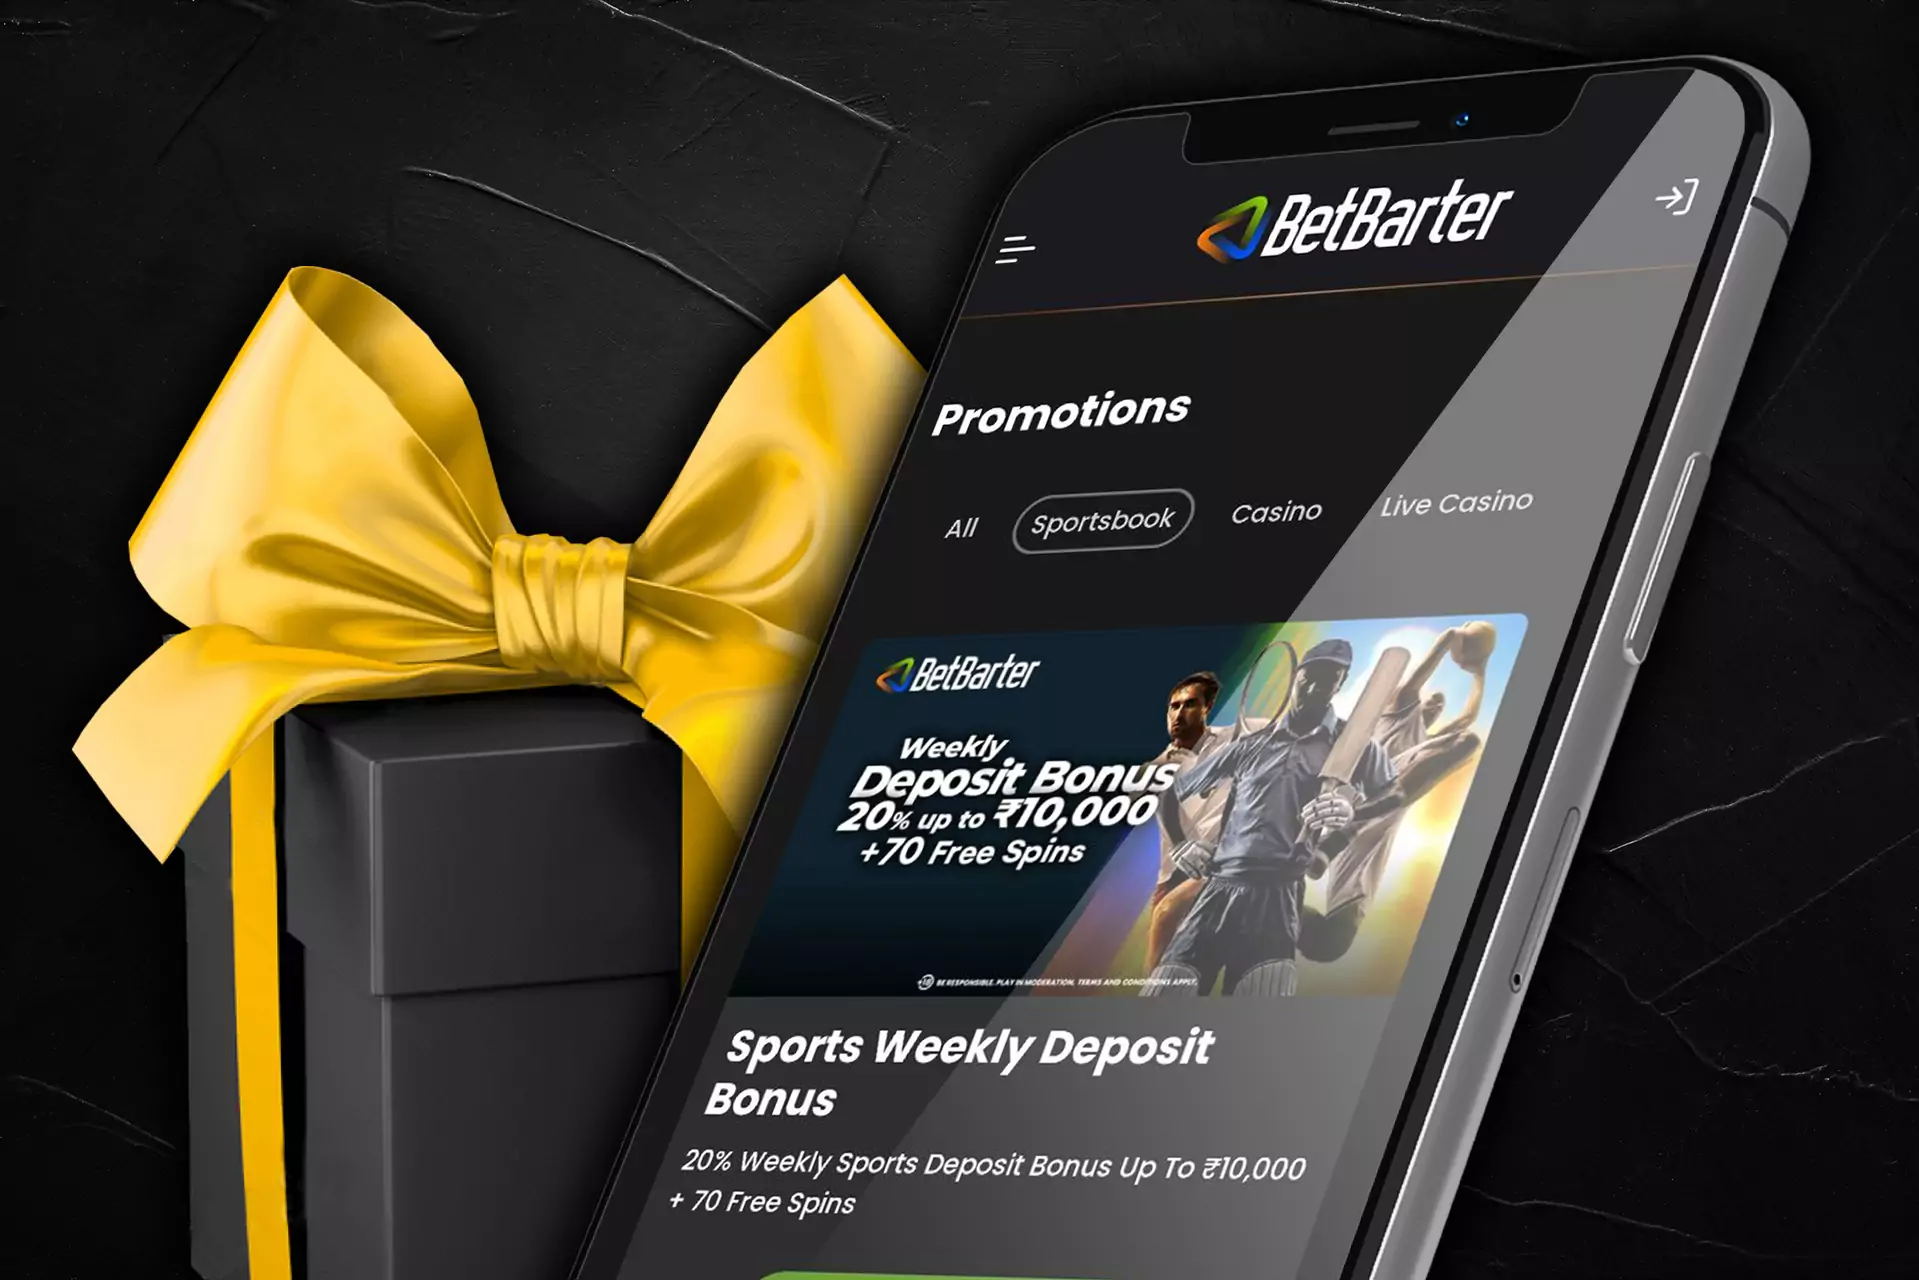 There are betting bonuses available in the Betbarter app.